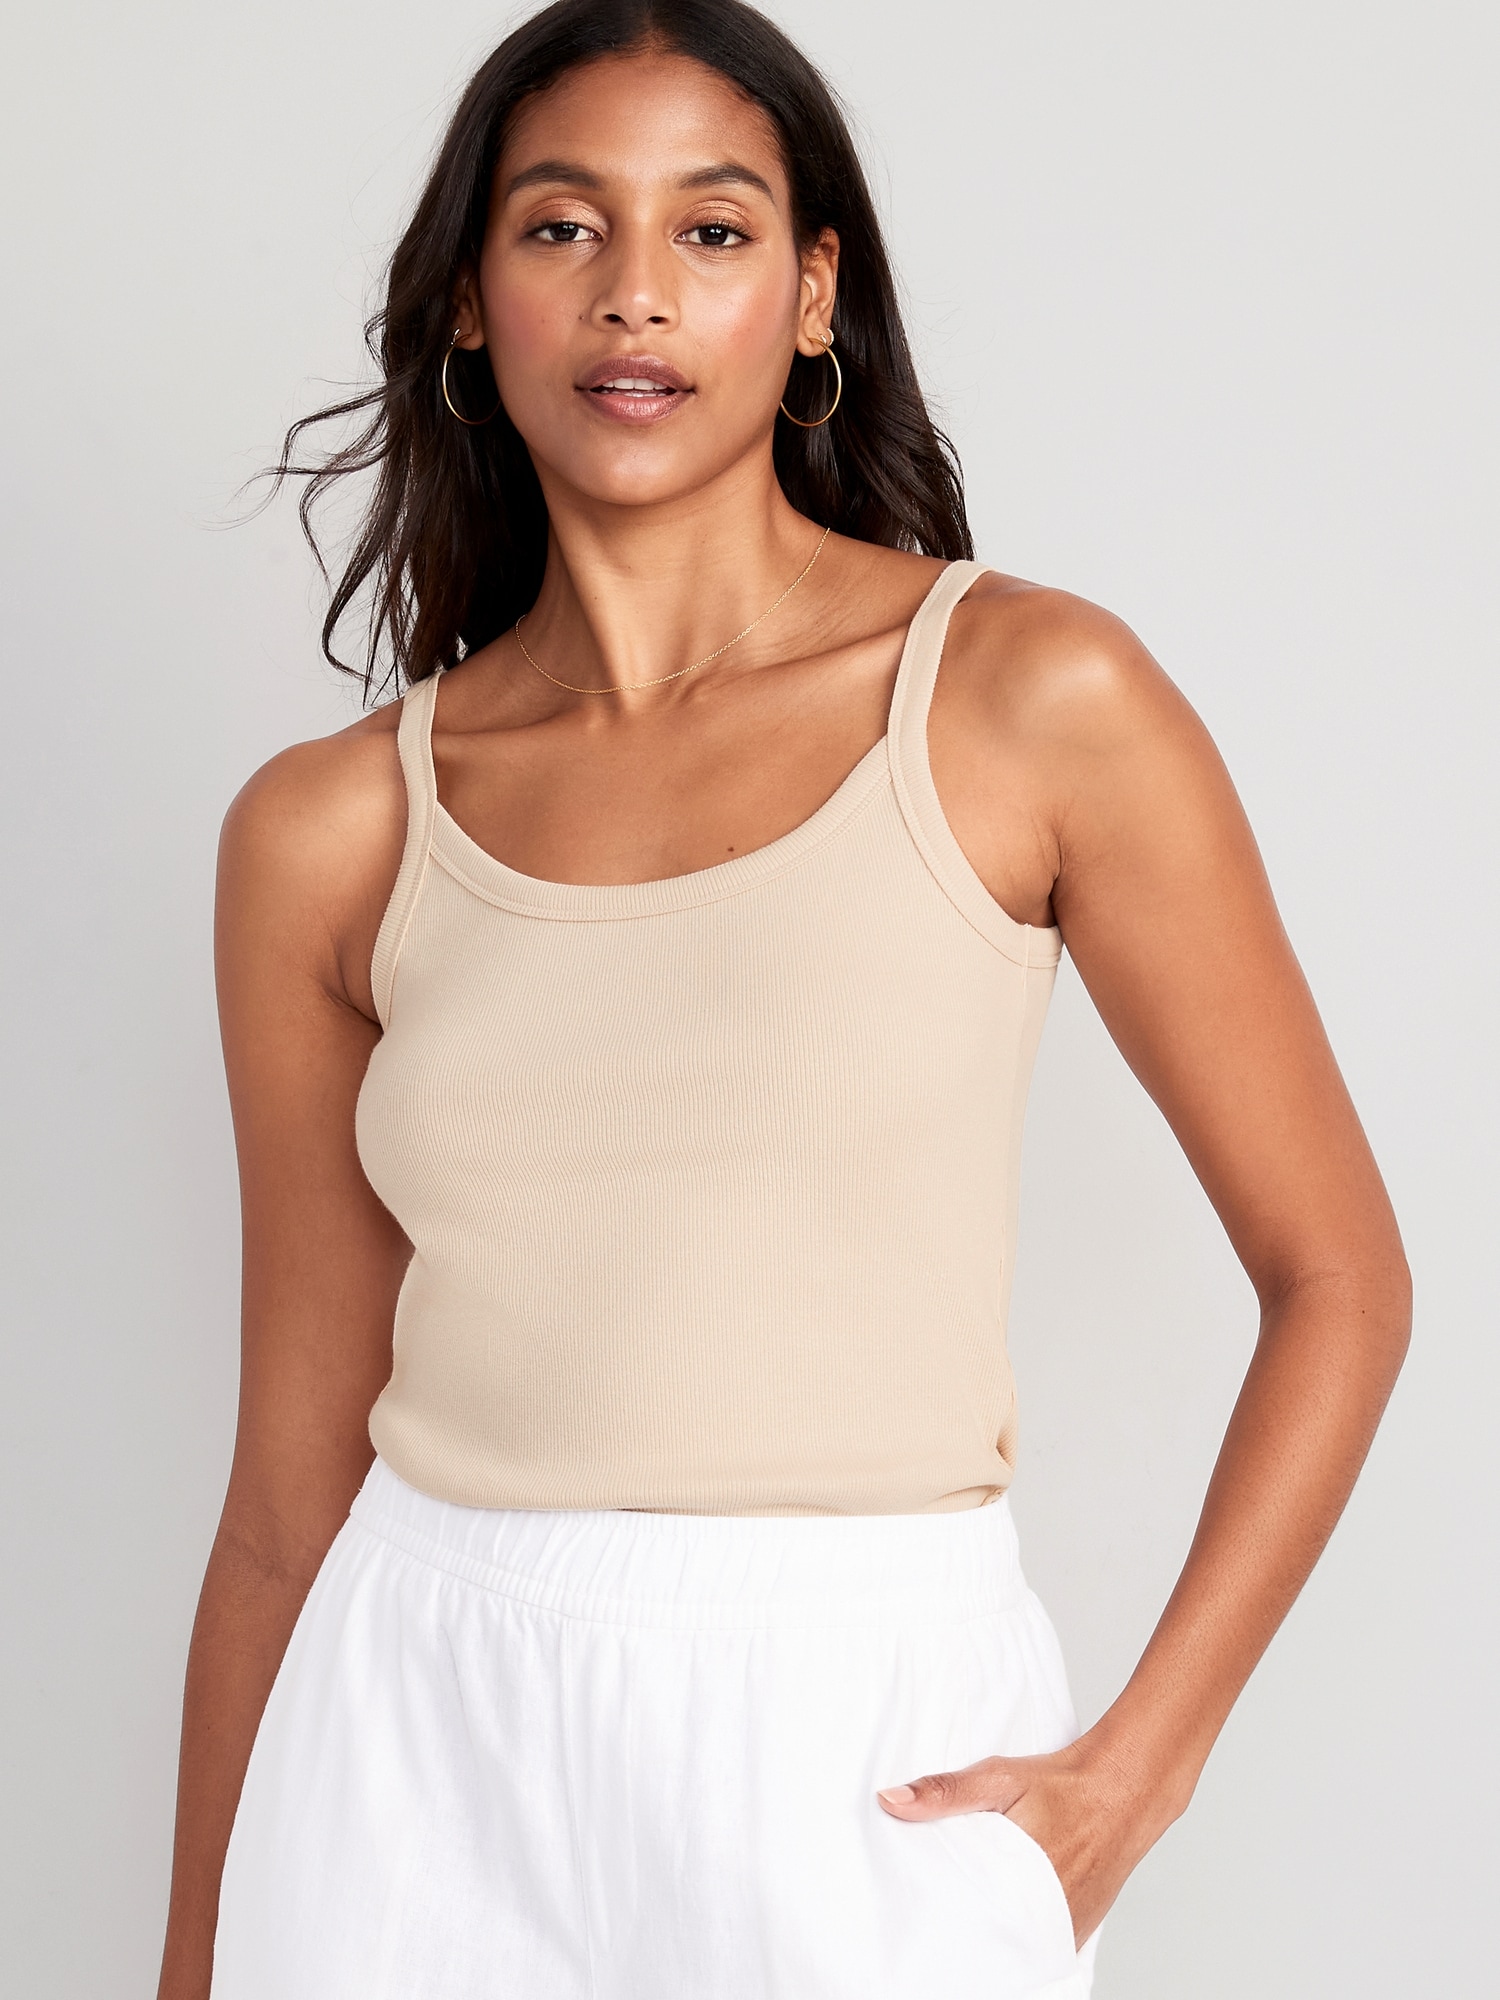 Fitted Rib-Knit Cami Top